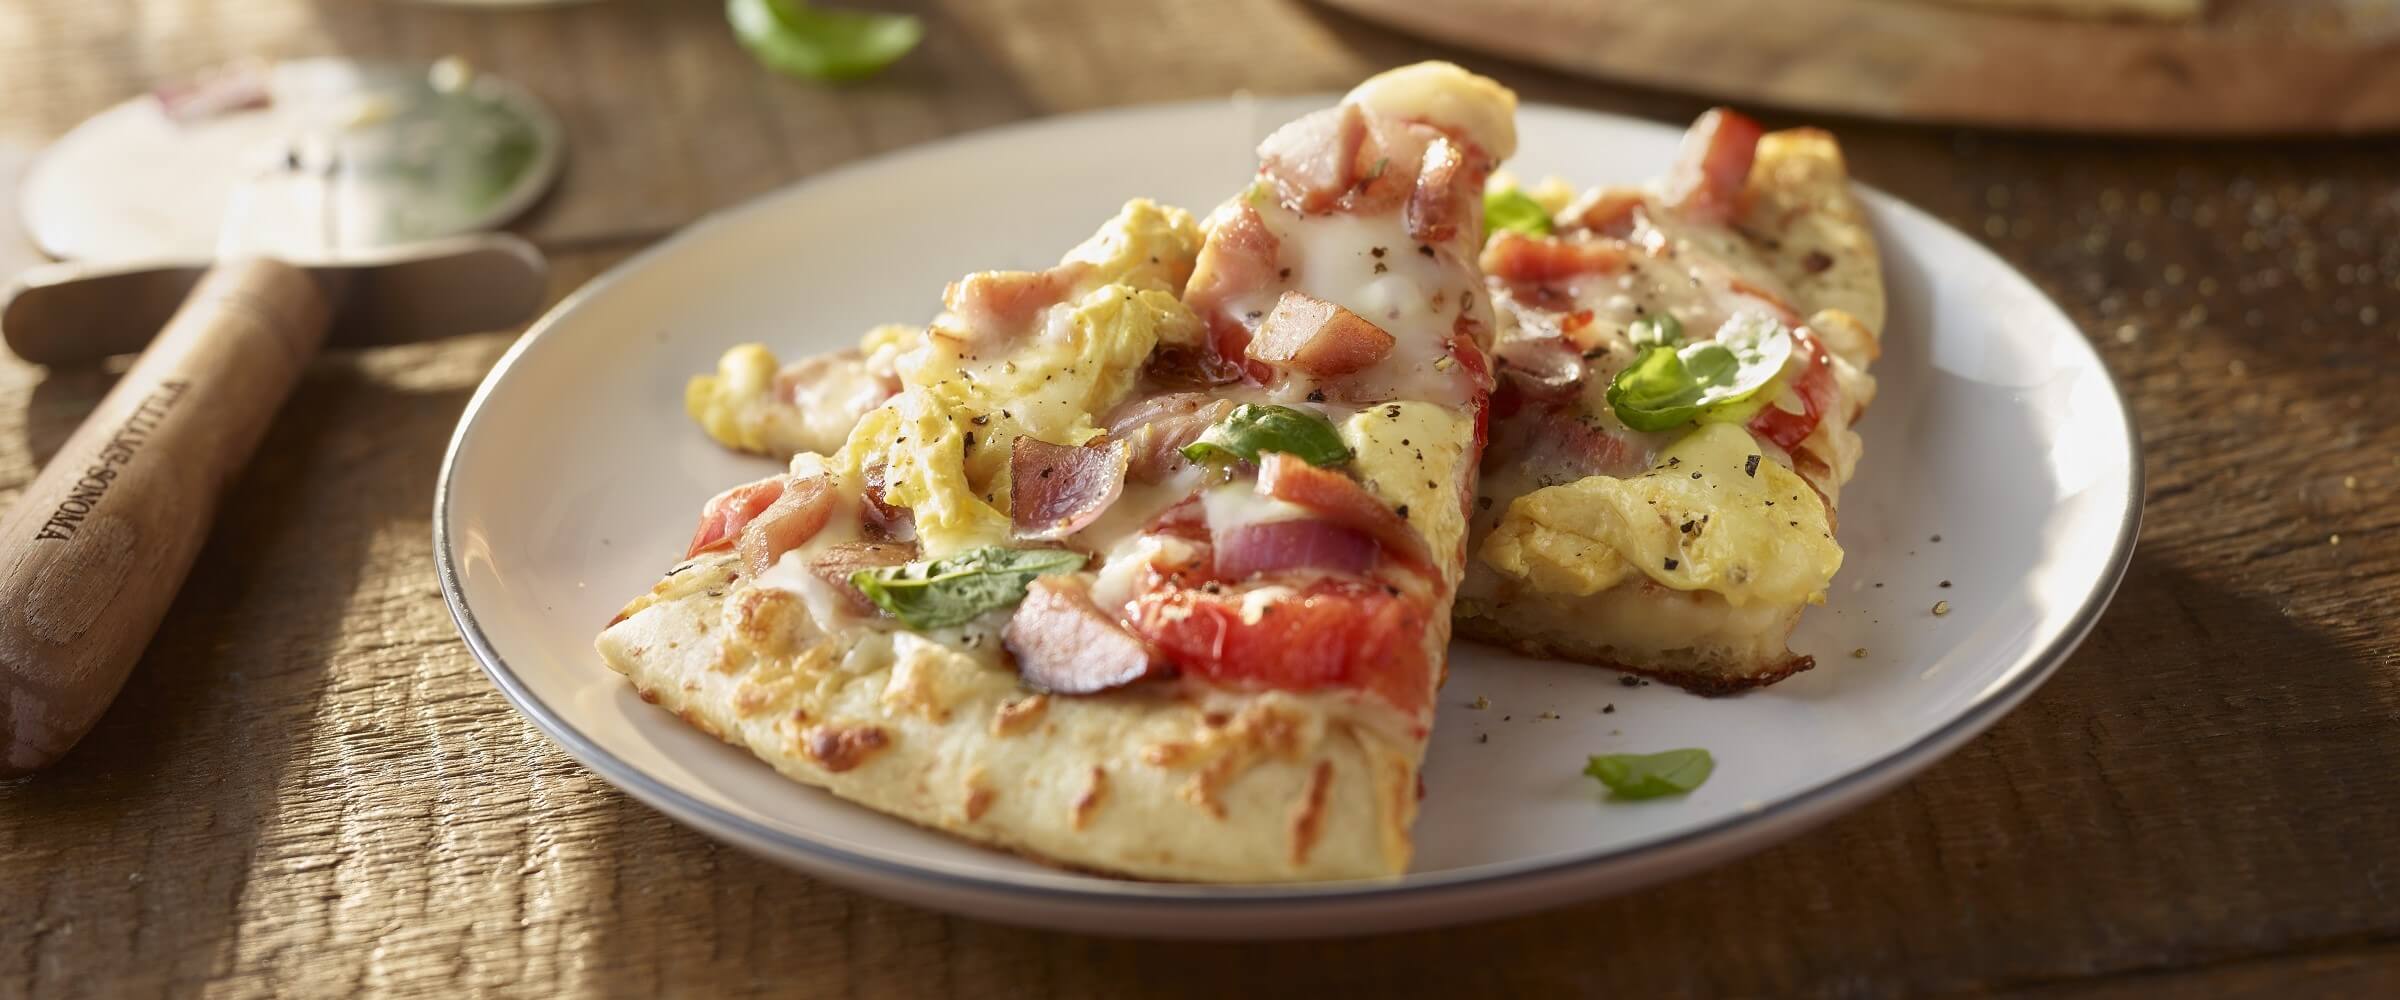 Breakfast pizza slices with ham and bacon on white plate